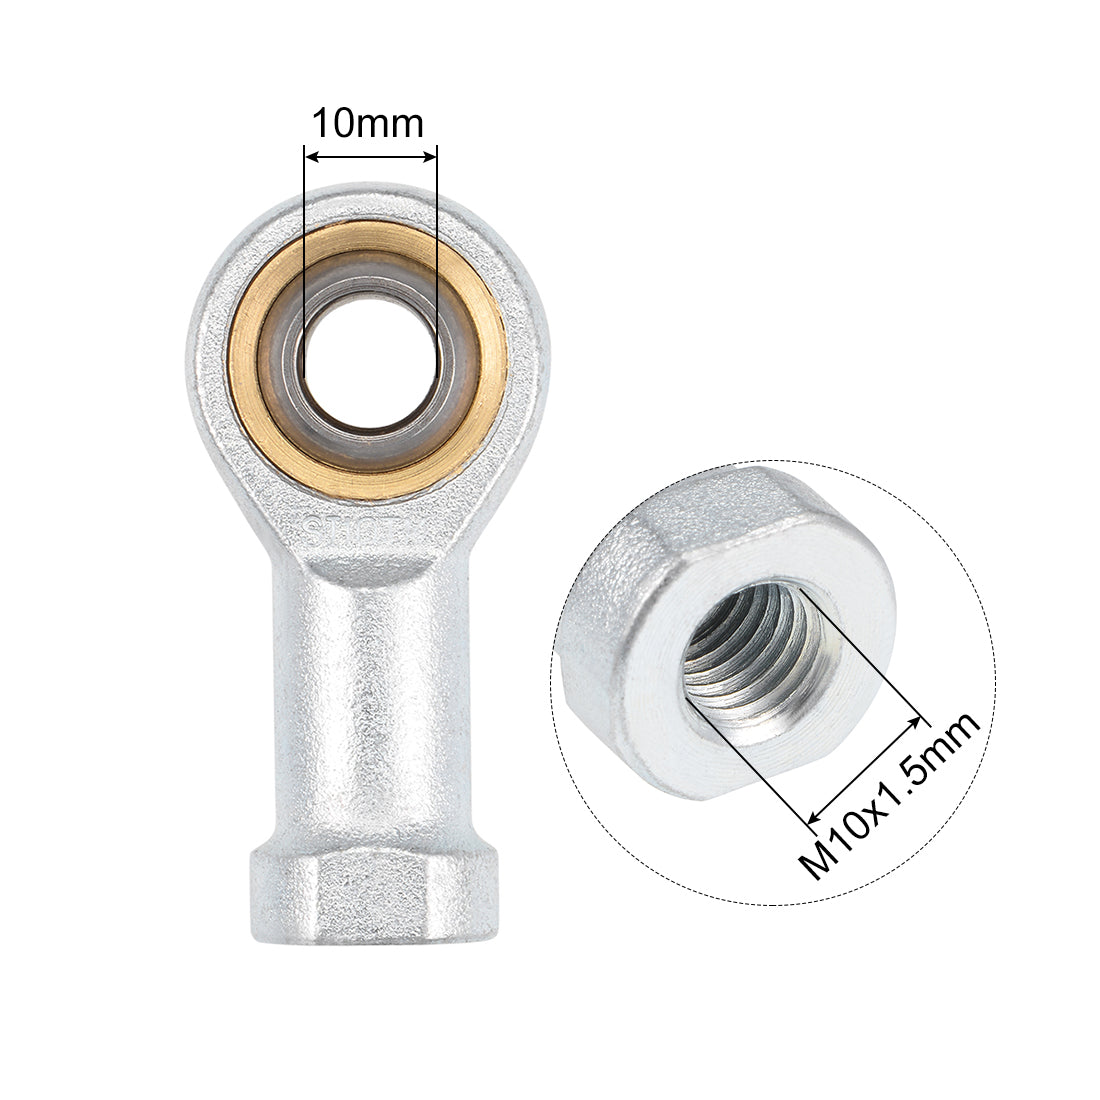 uxcell Uxcell 10mm Rod End Bearing M10x1.5mm Rod Ends Ball Joint Female Right Hand Thread 4pcs